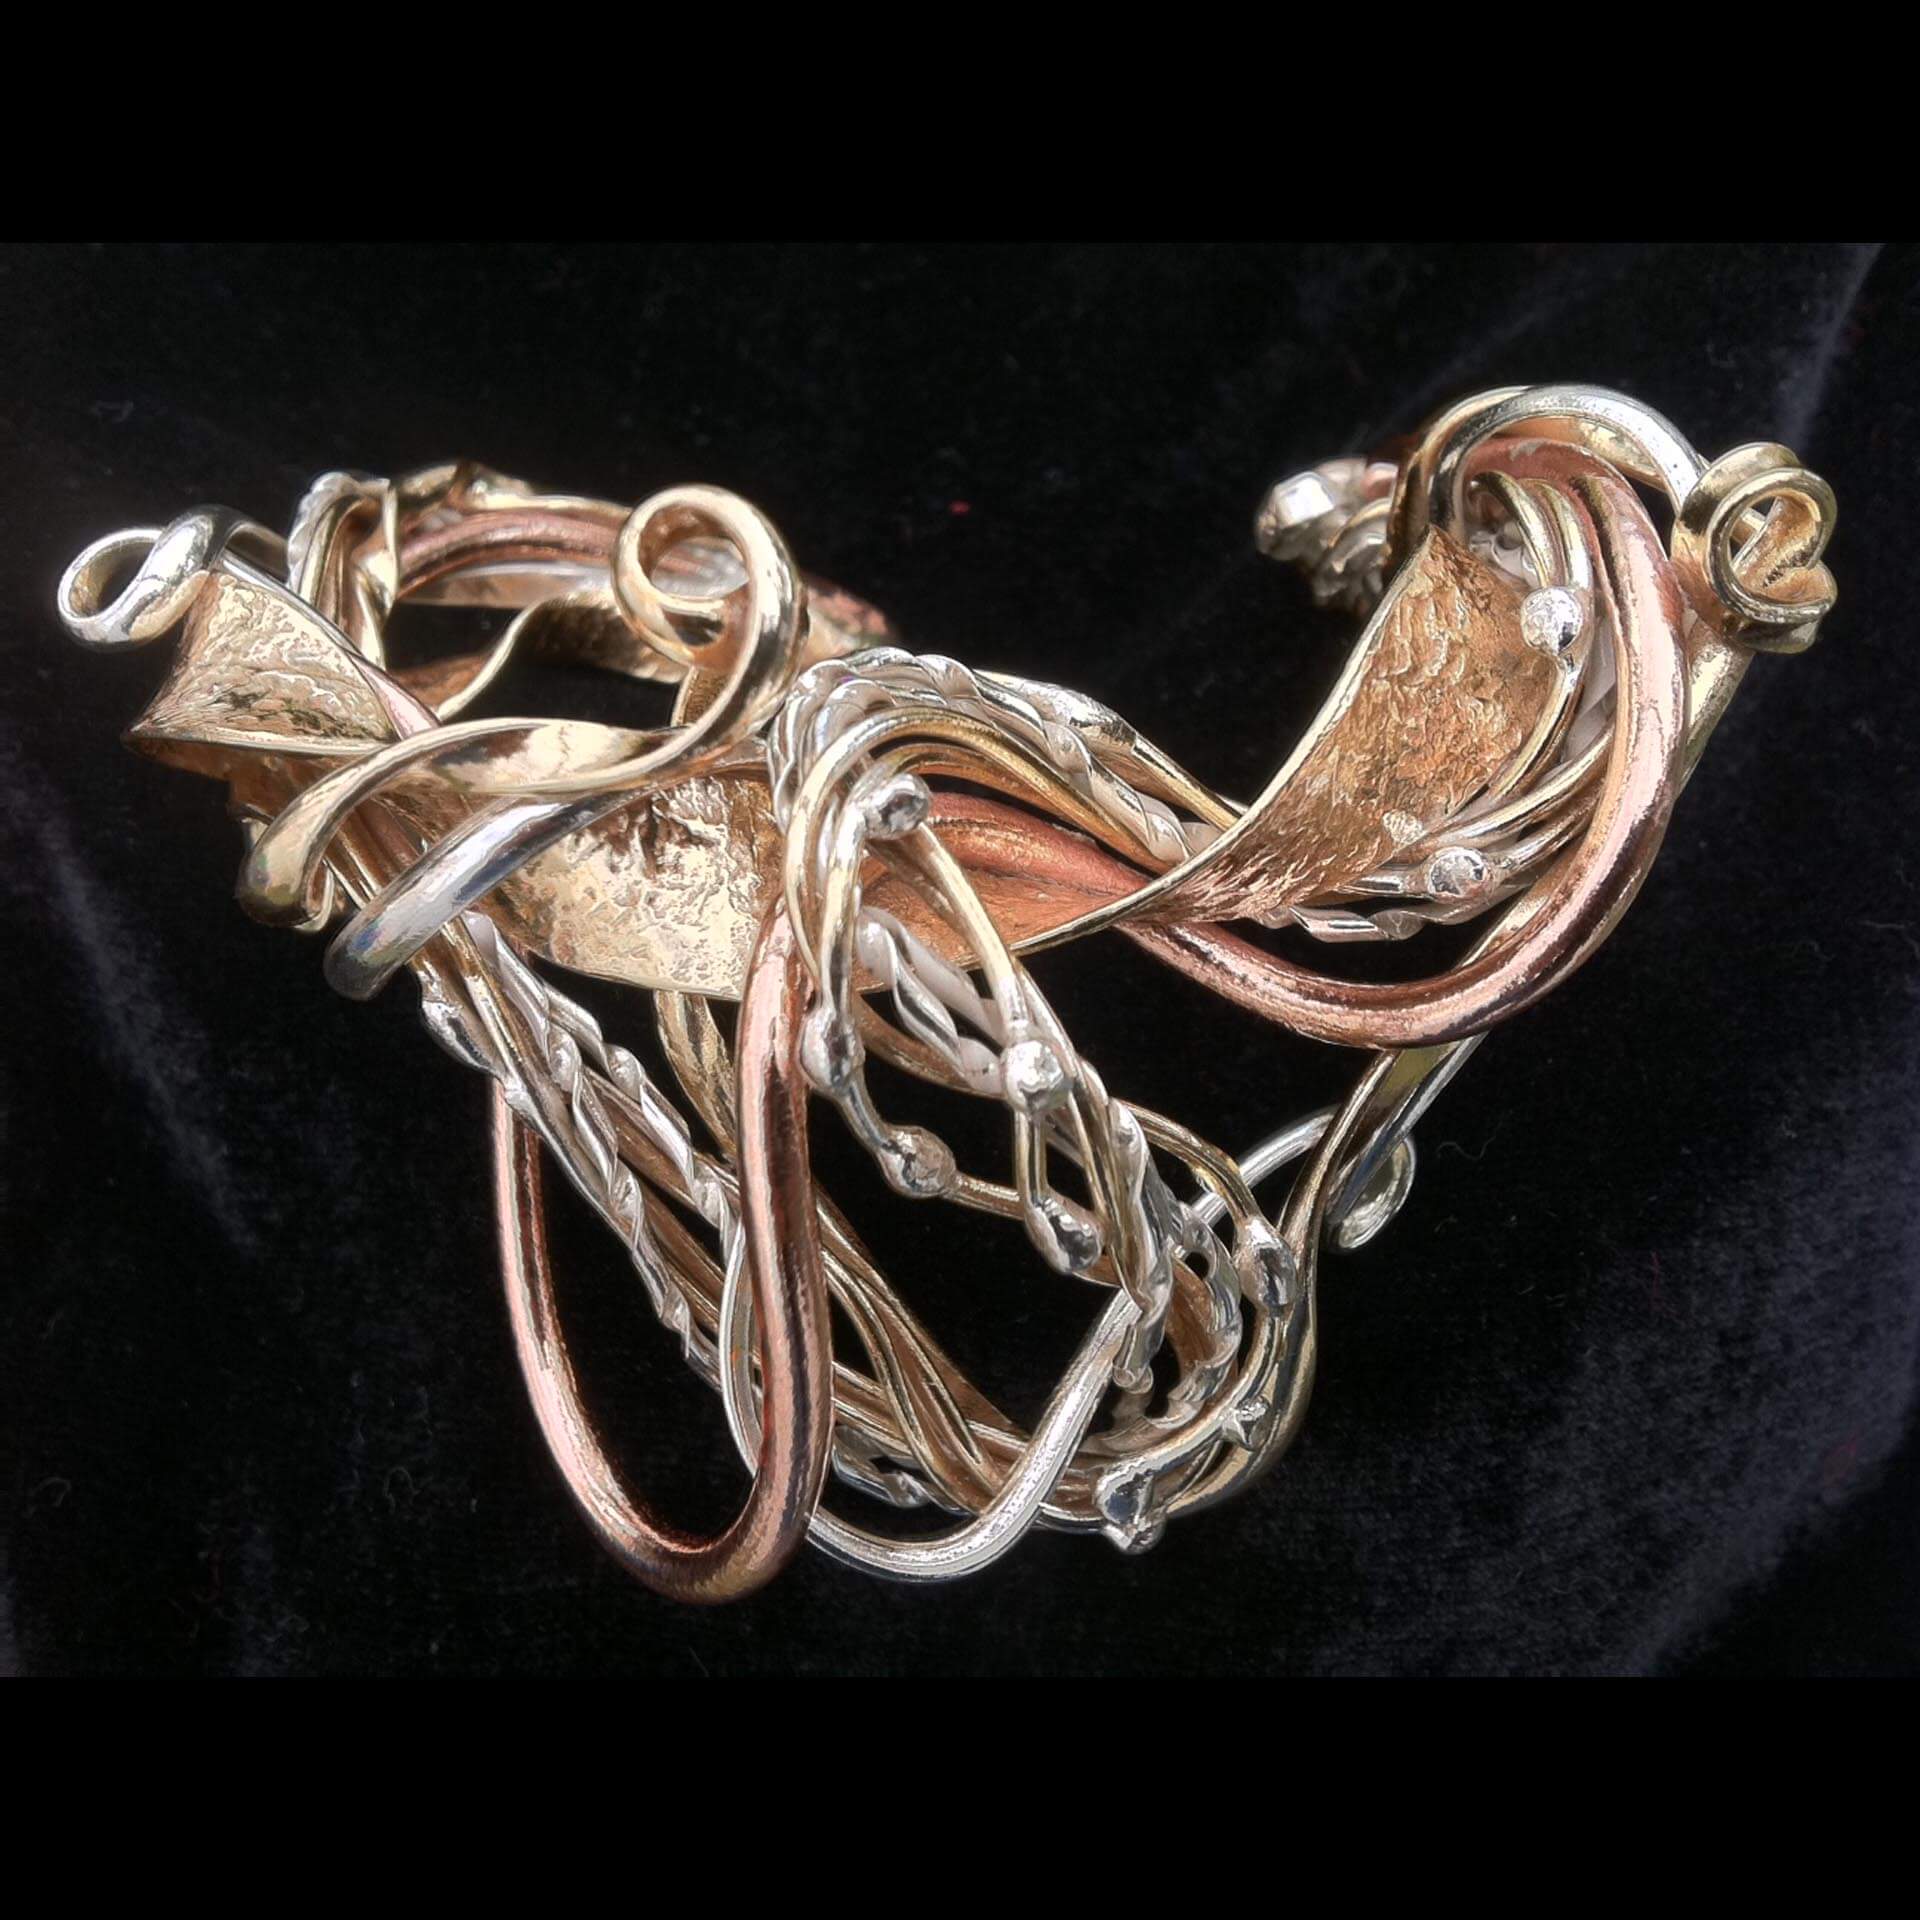 Jewelry by Hammer& Torch, Inc. Woodstock-New Paltz Art & Crafts Fair, Handcrafted Jewelry